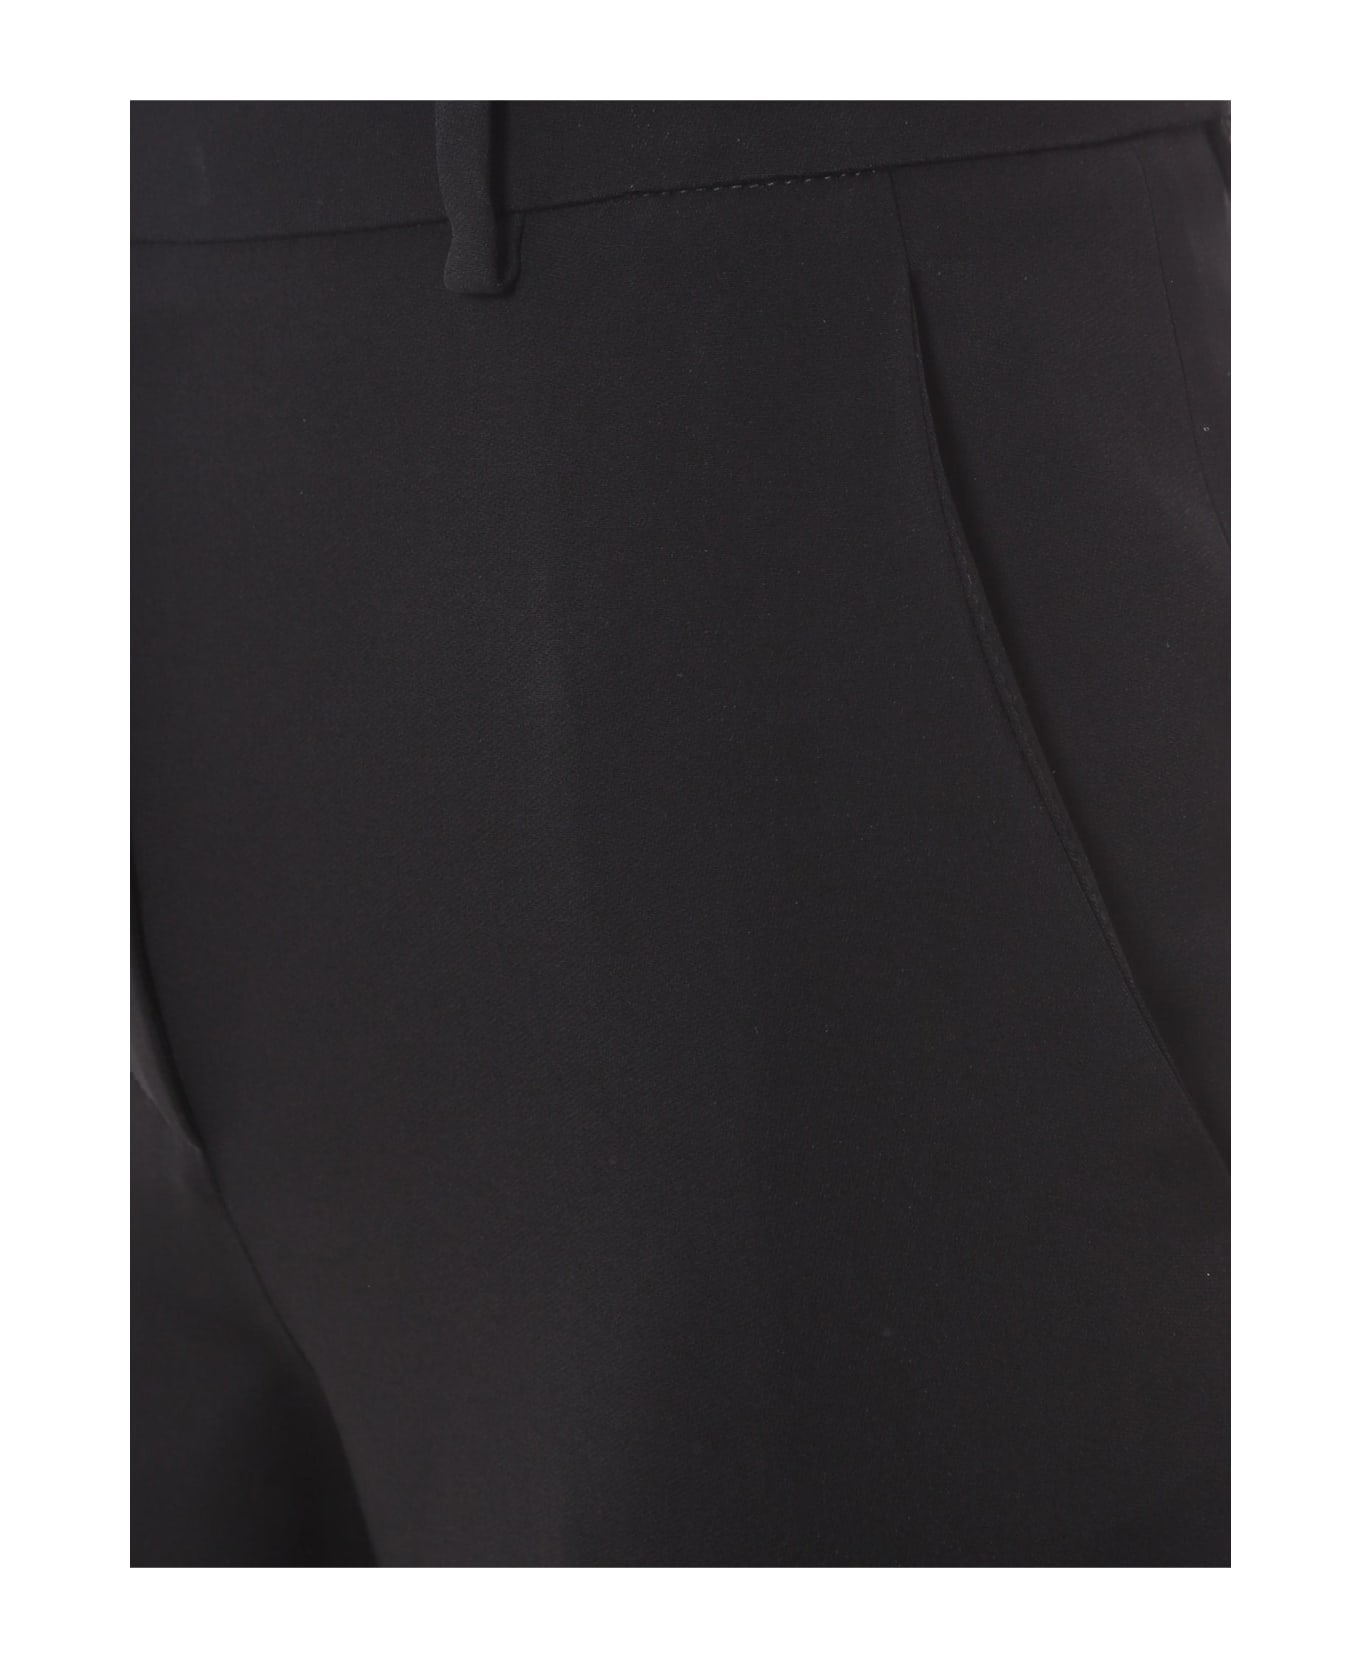 Giorgio Armani Long-length Concealed Trousers - Black ボトムス